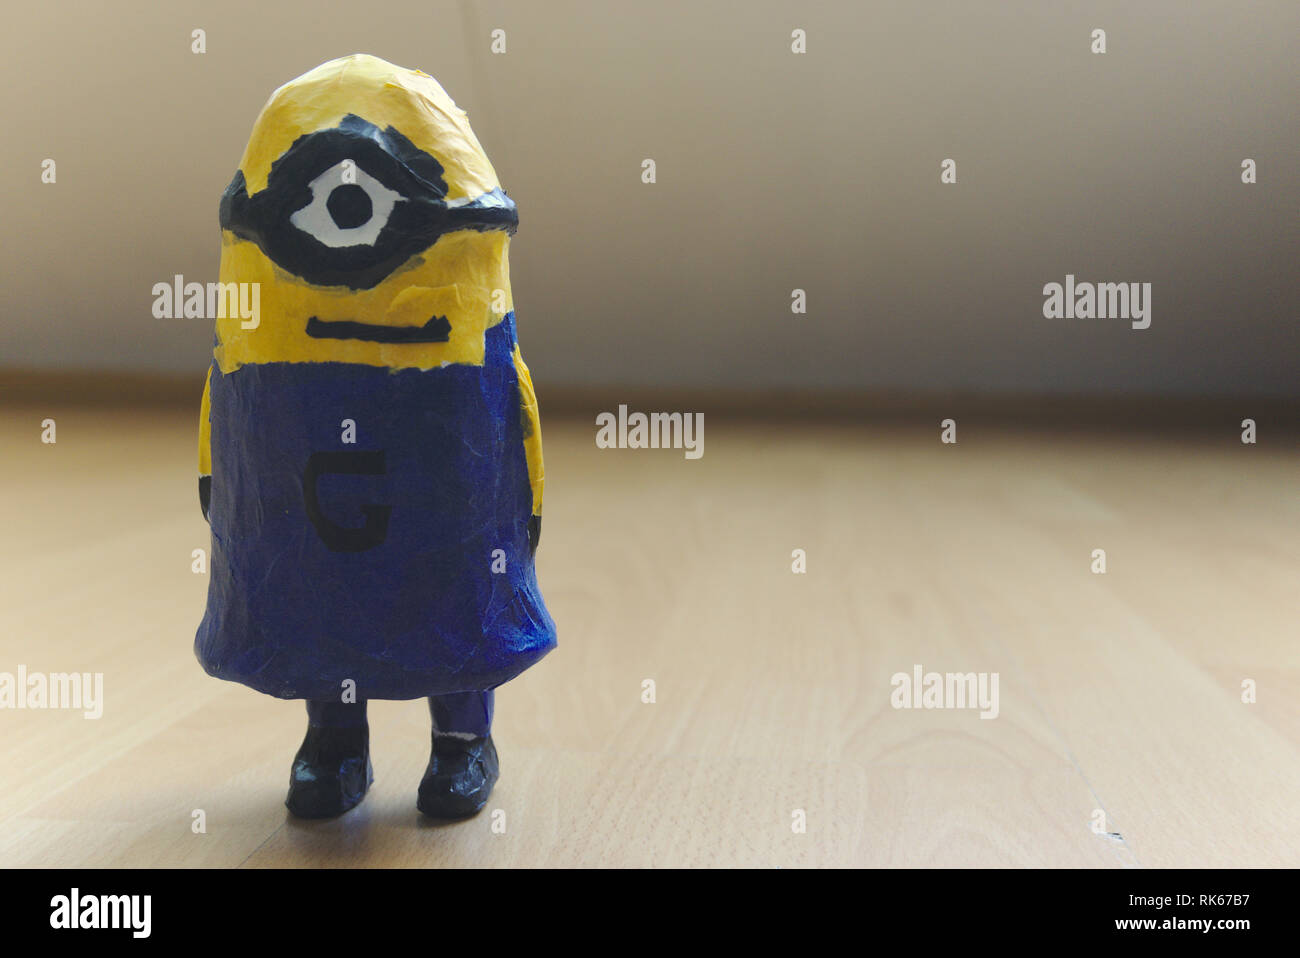 diy selfmade minion with one eye and black goggle. blue jeans. despicable me. Stock Photo